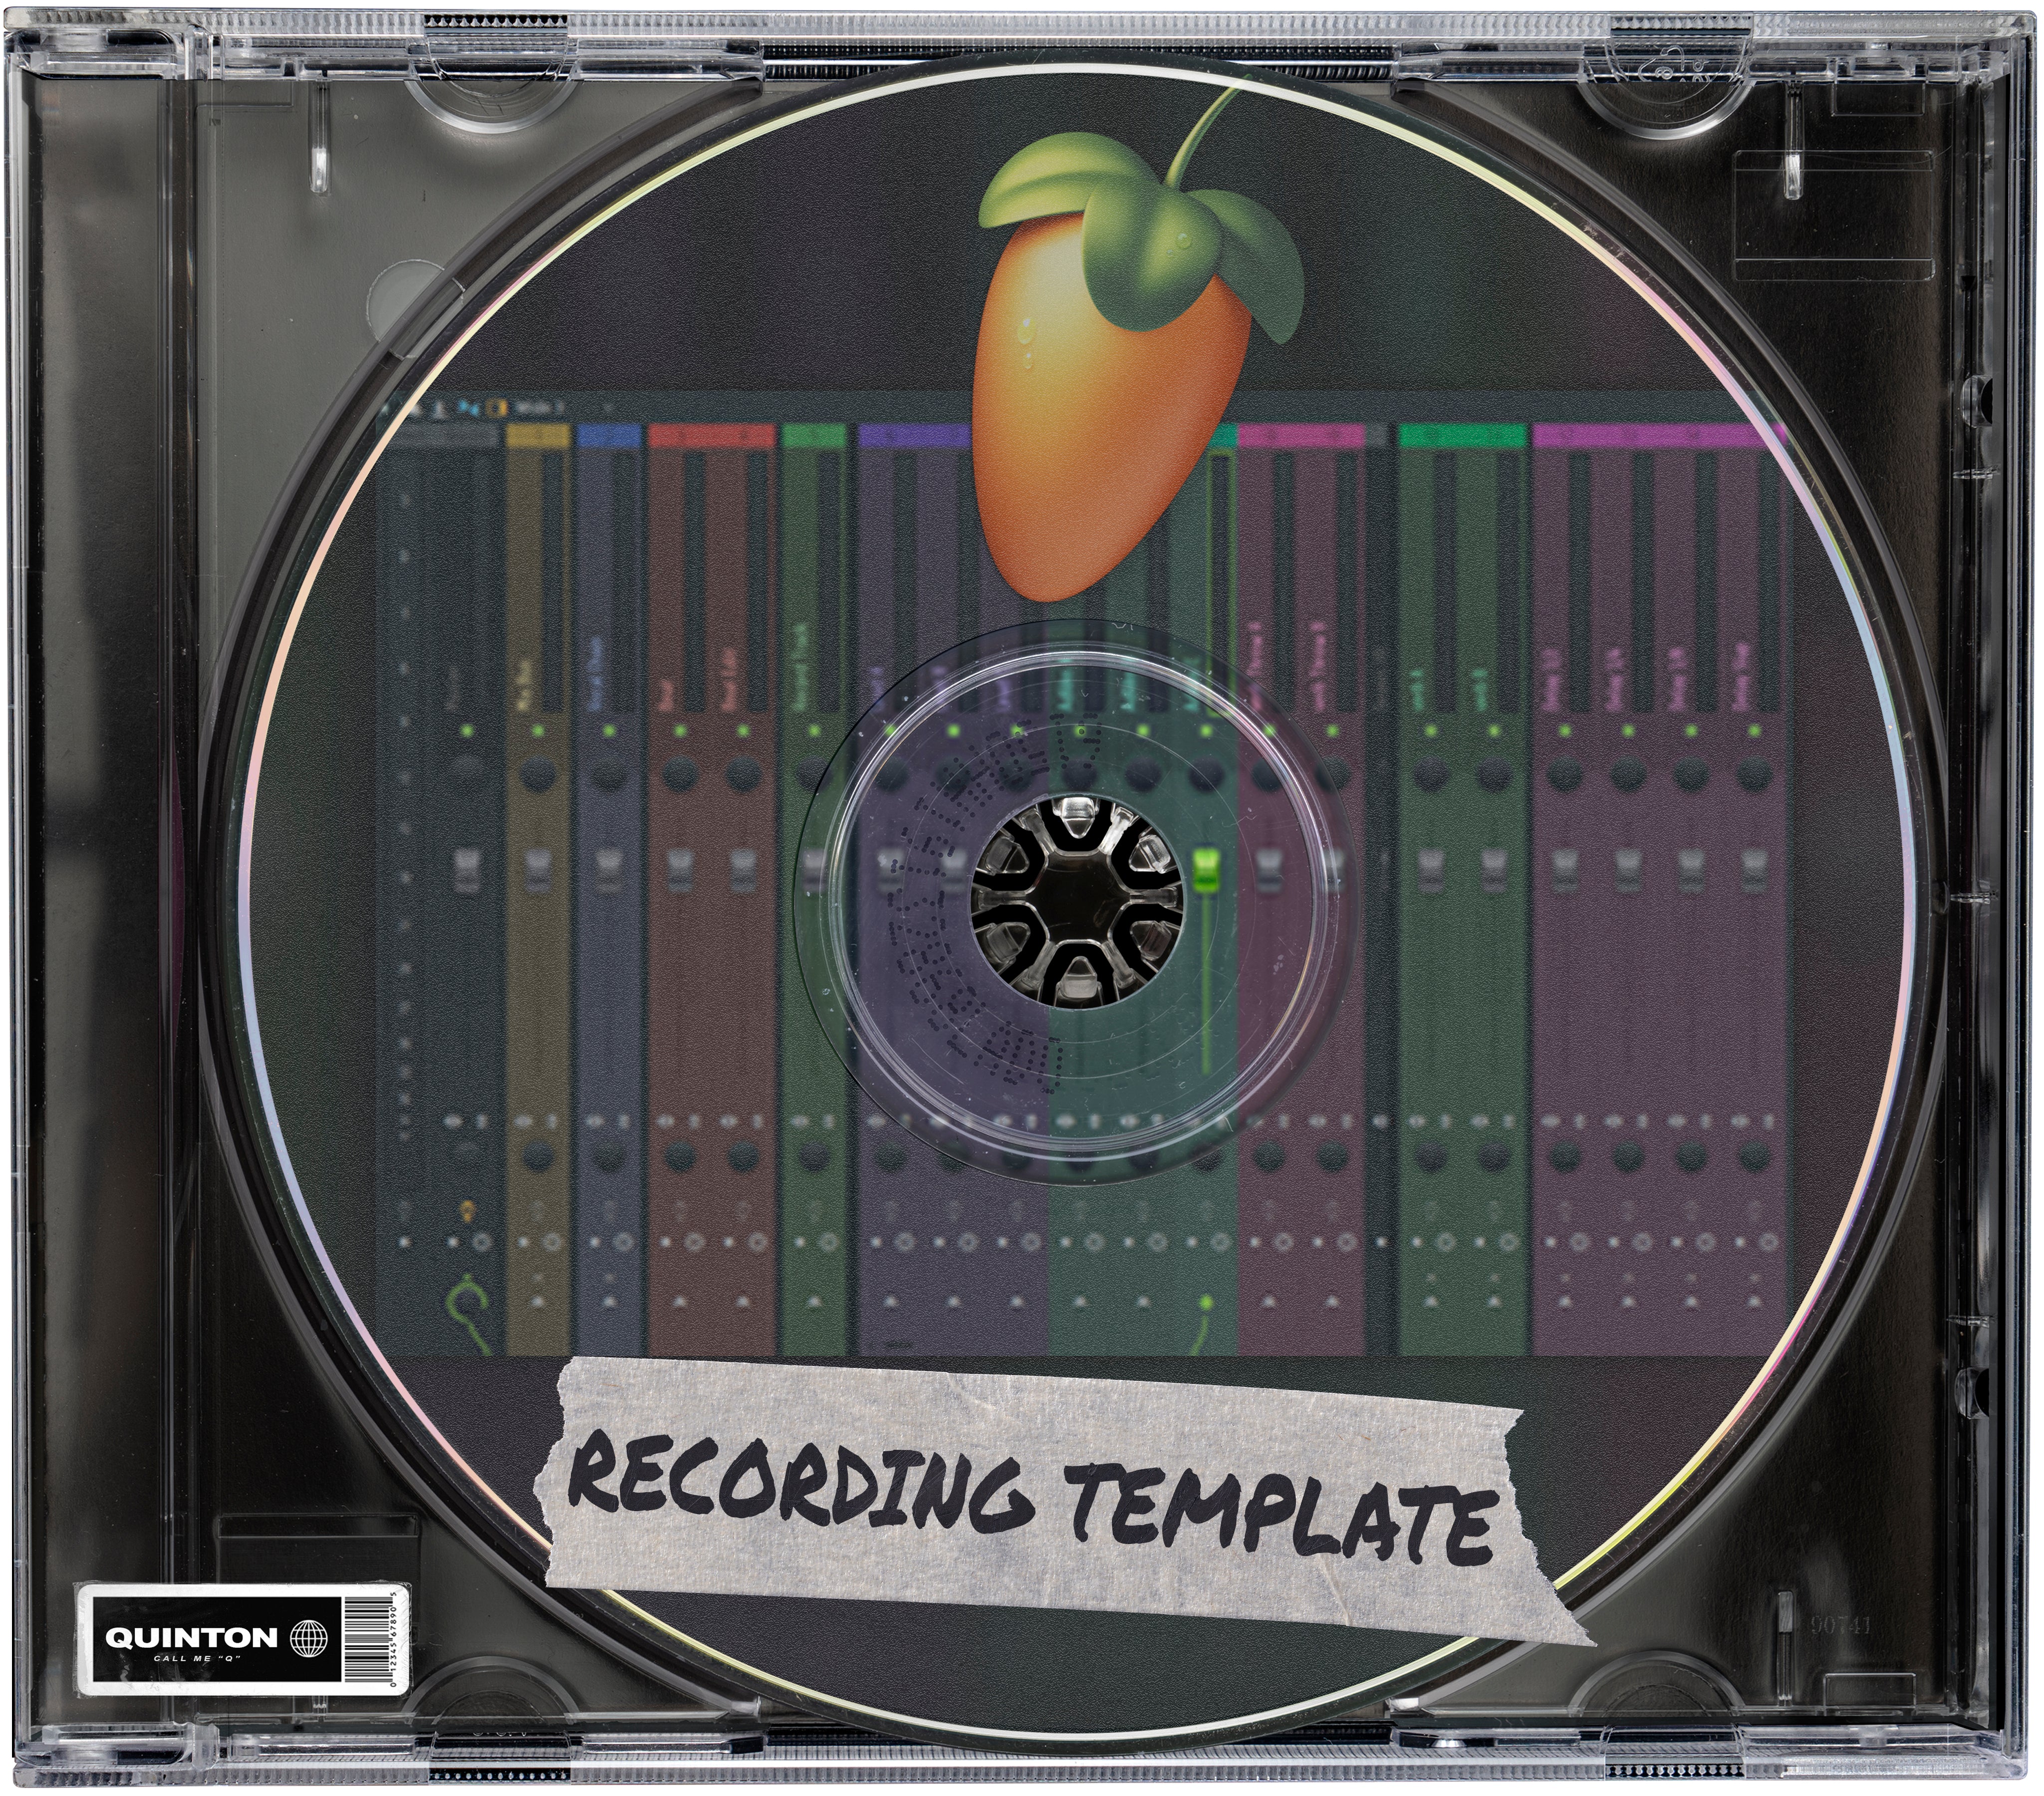 THE RECORDING TEMPLATE